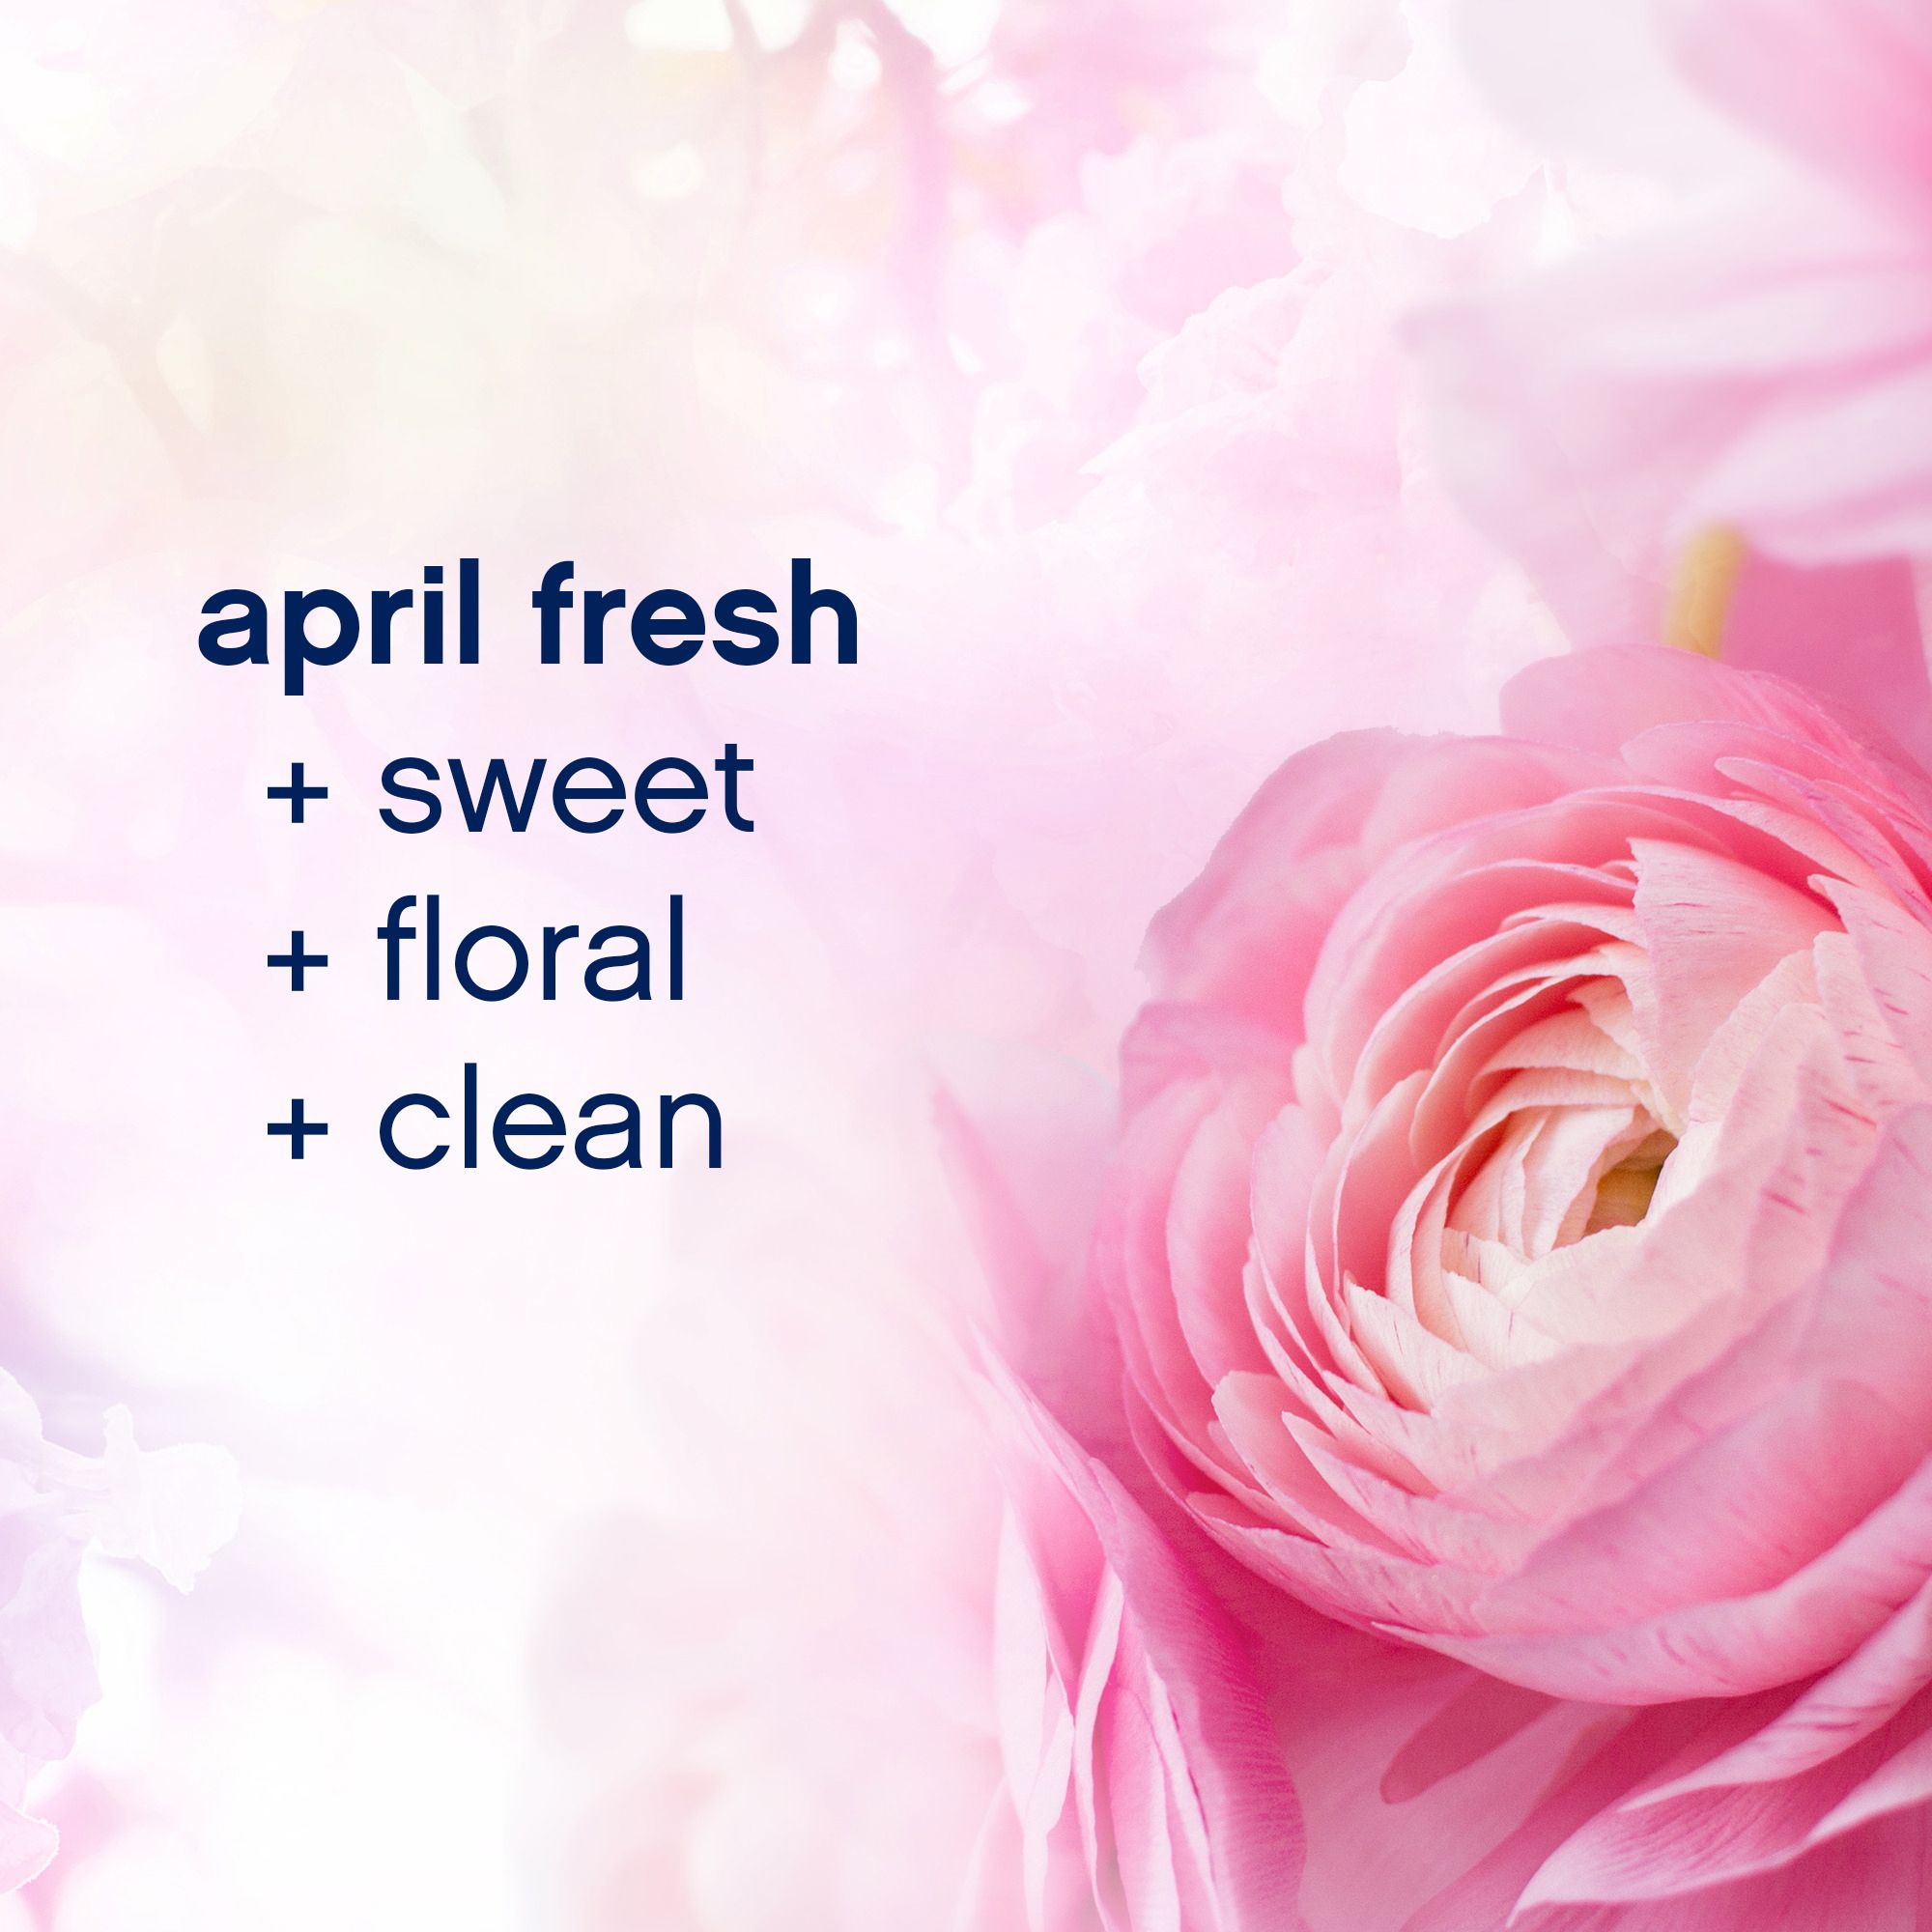 Febreze Air Air Refresher, April Fresh with Downy Scent - 8.8 oz